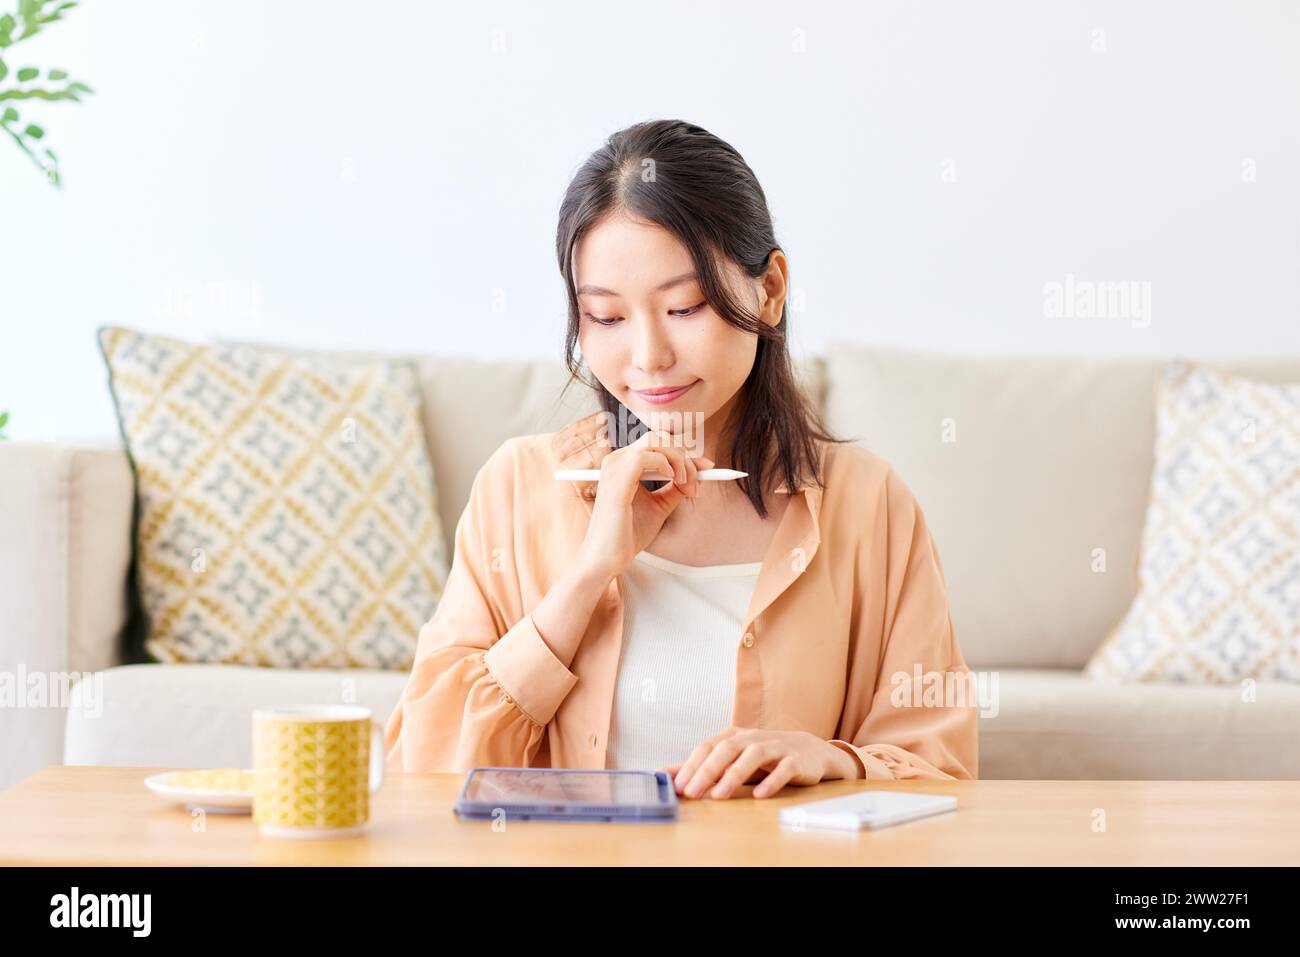 Asian woman using tablet at home Stock Photo